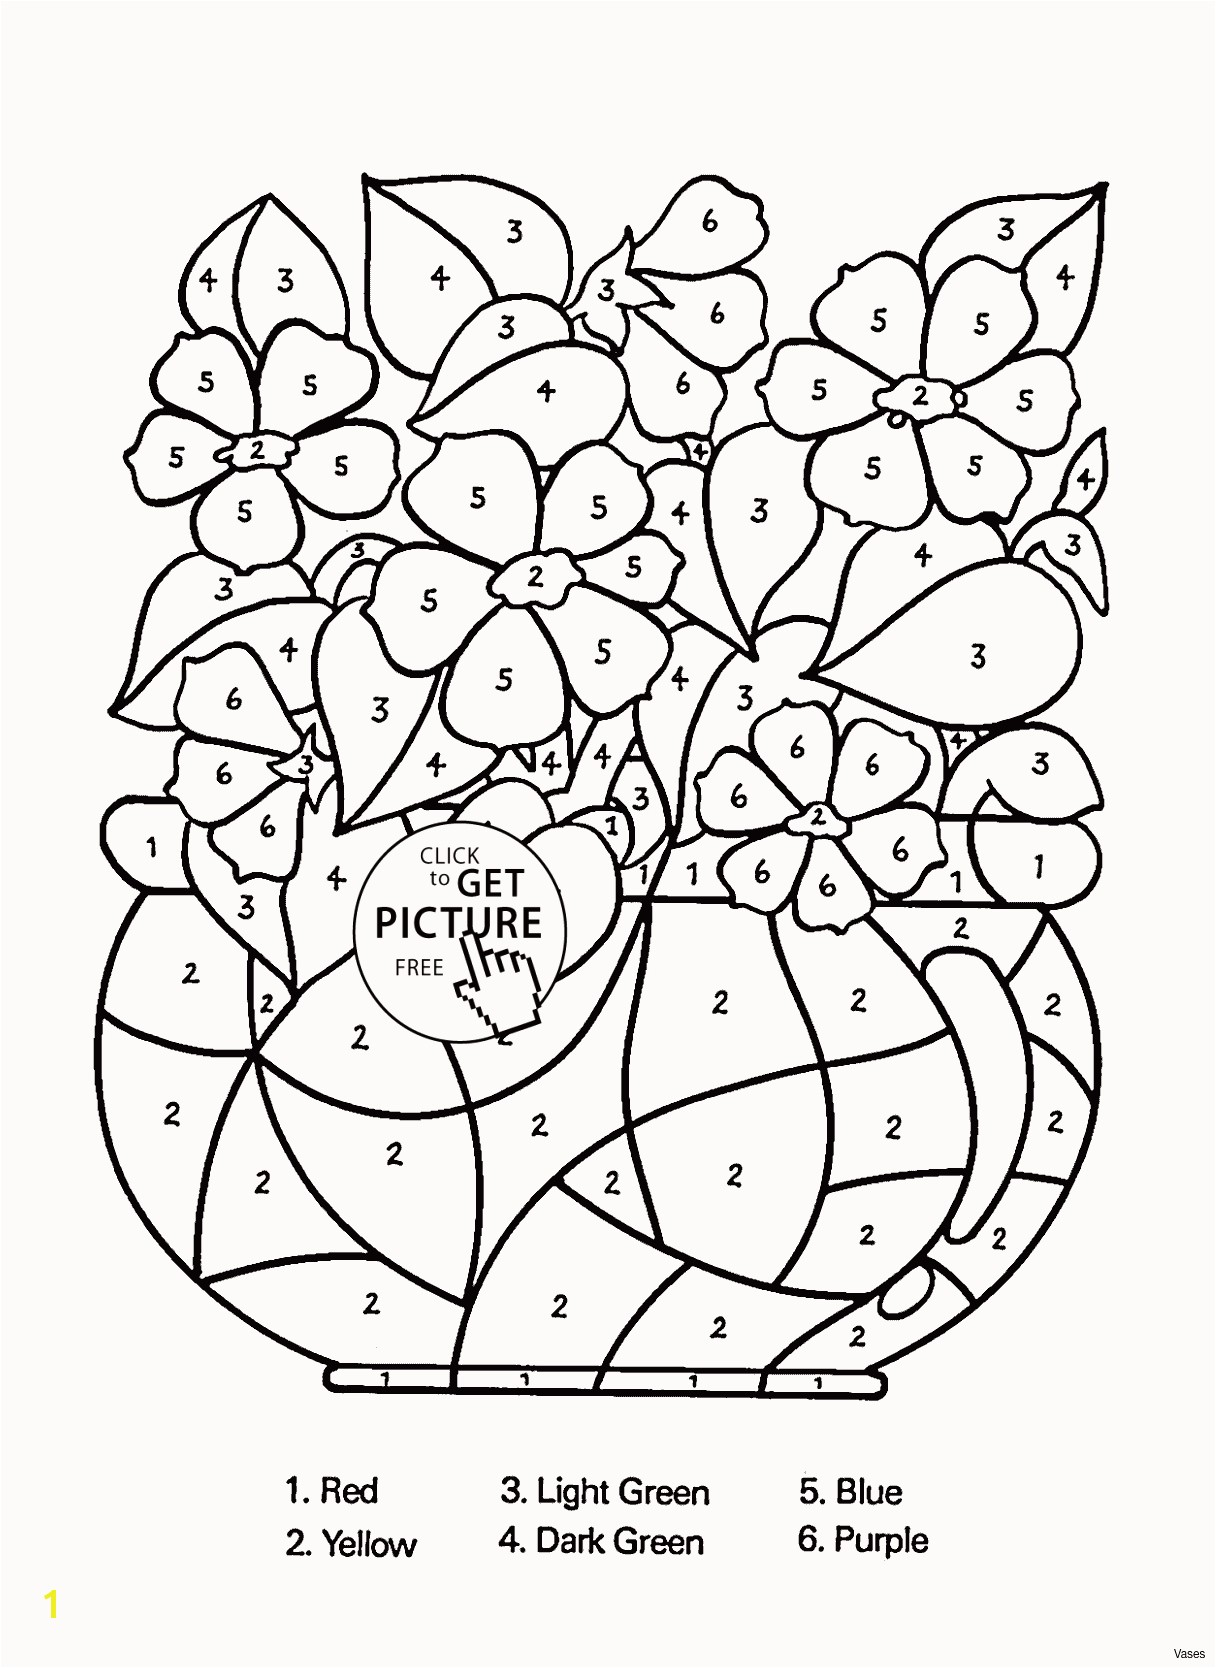 Pbr Coloring Pages Elegant 18lovely Free Printable Alphabet Coloring Pages Clip Arts Pbr Coloring Pages